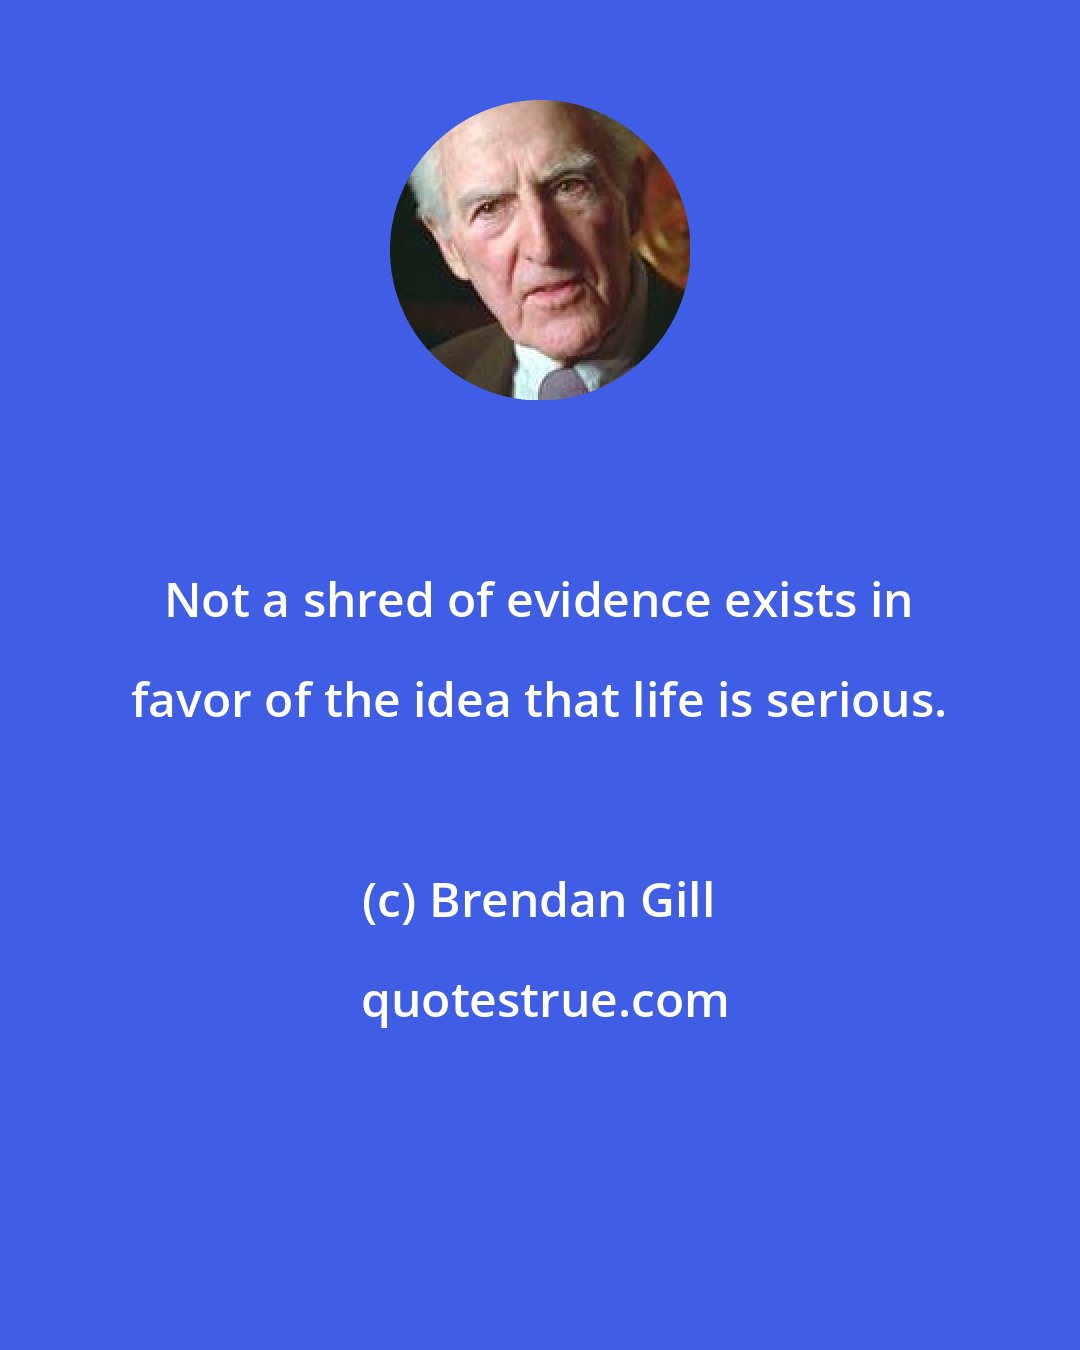 Brendan Gill: Not a shred of evidence exists in favor of the idea that life is serious.